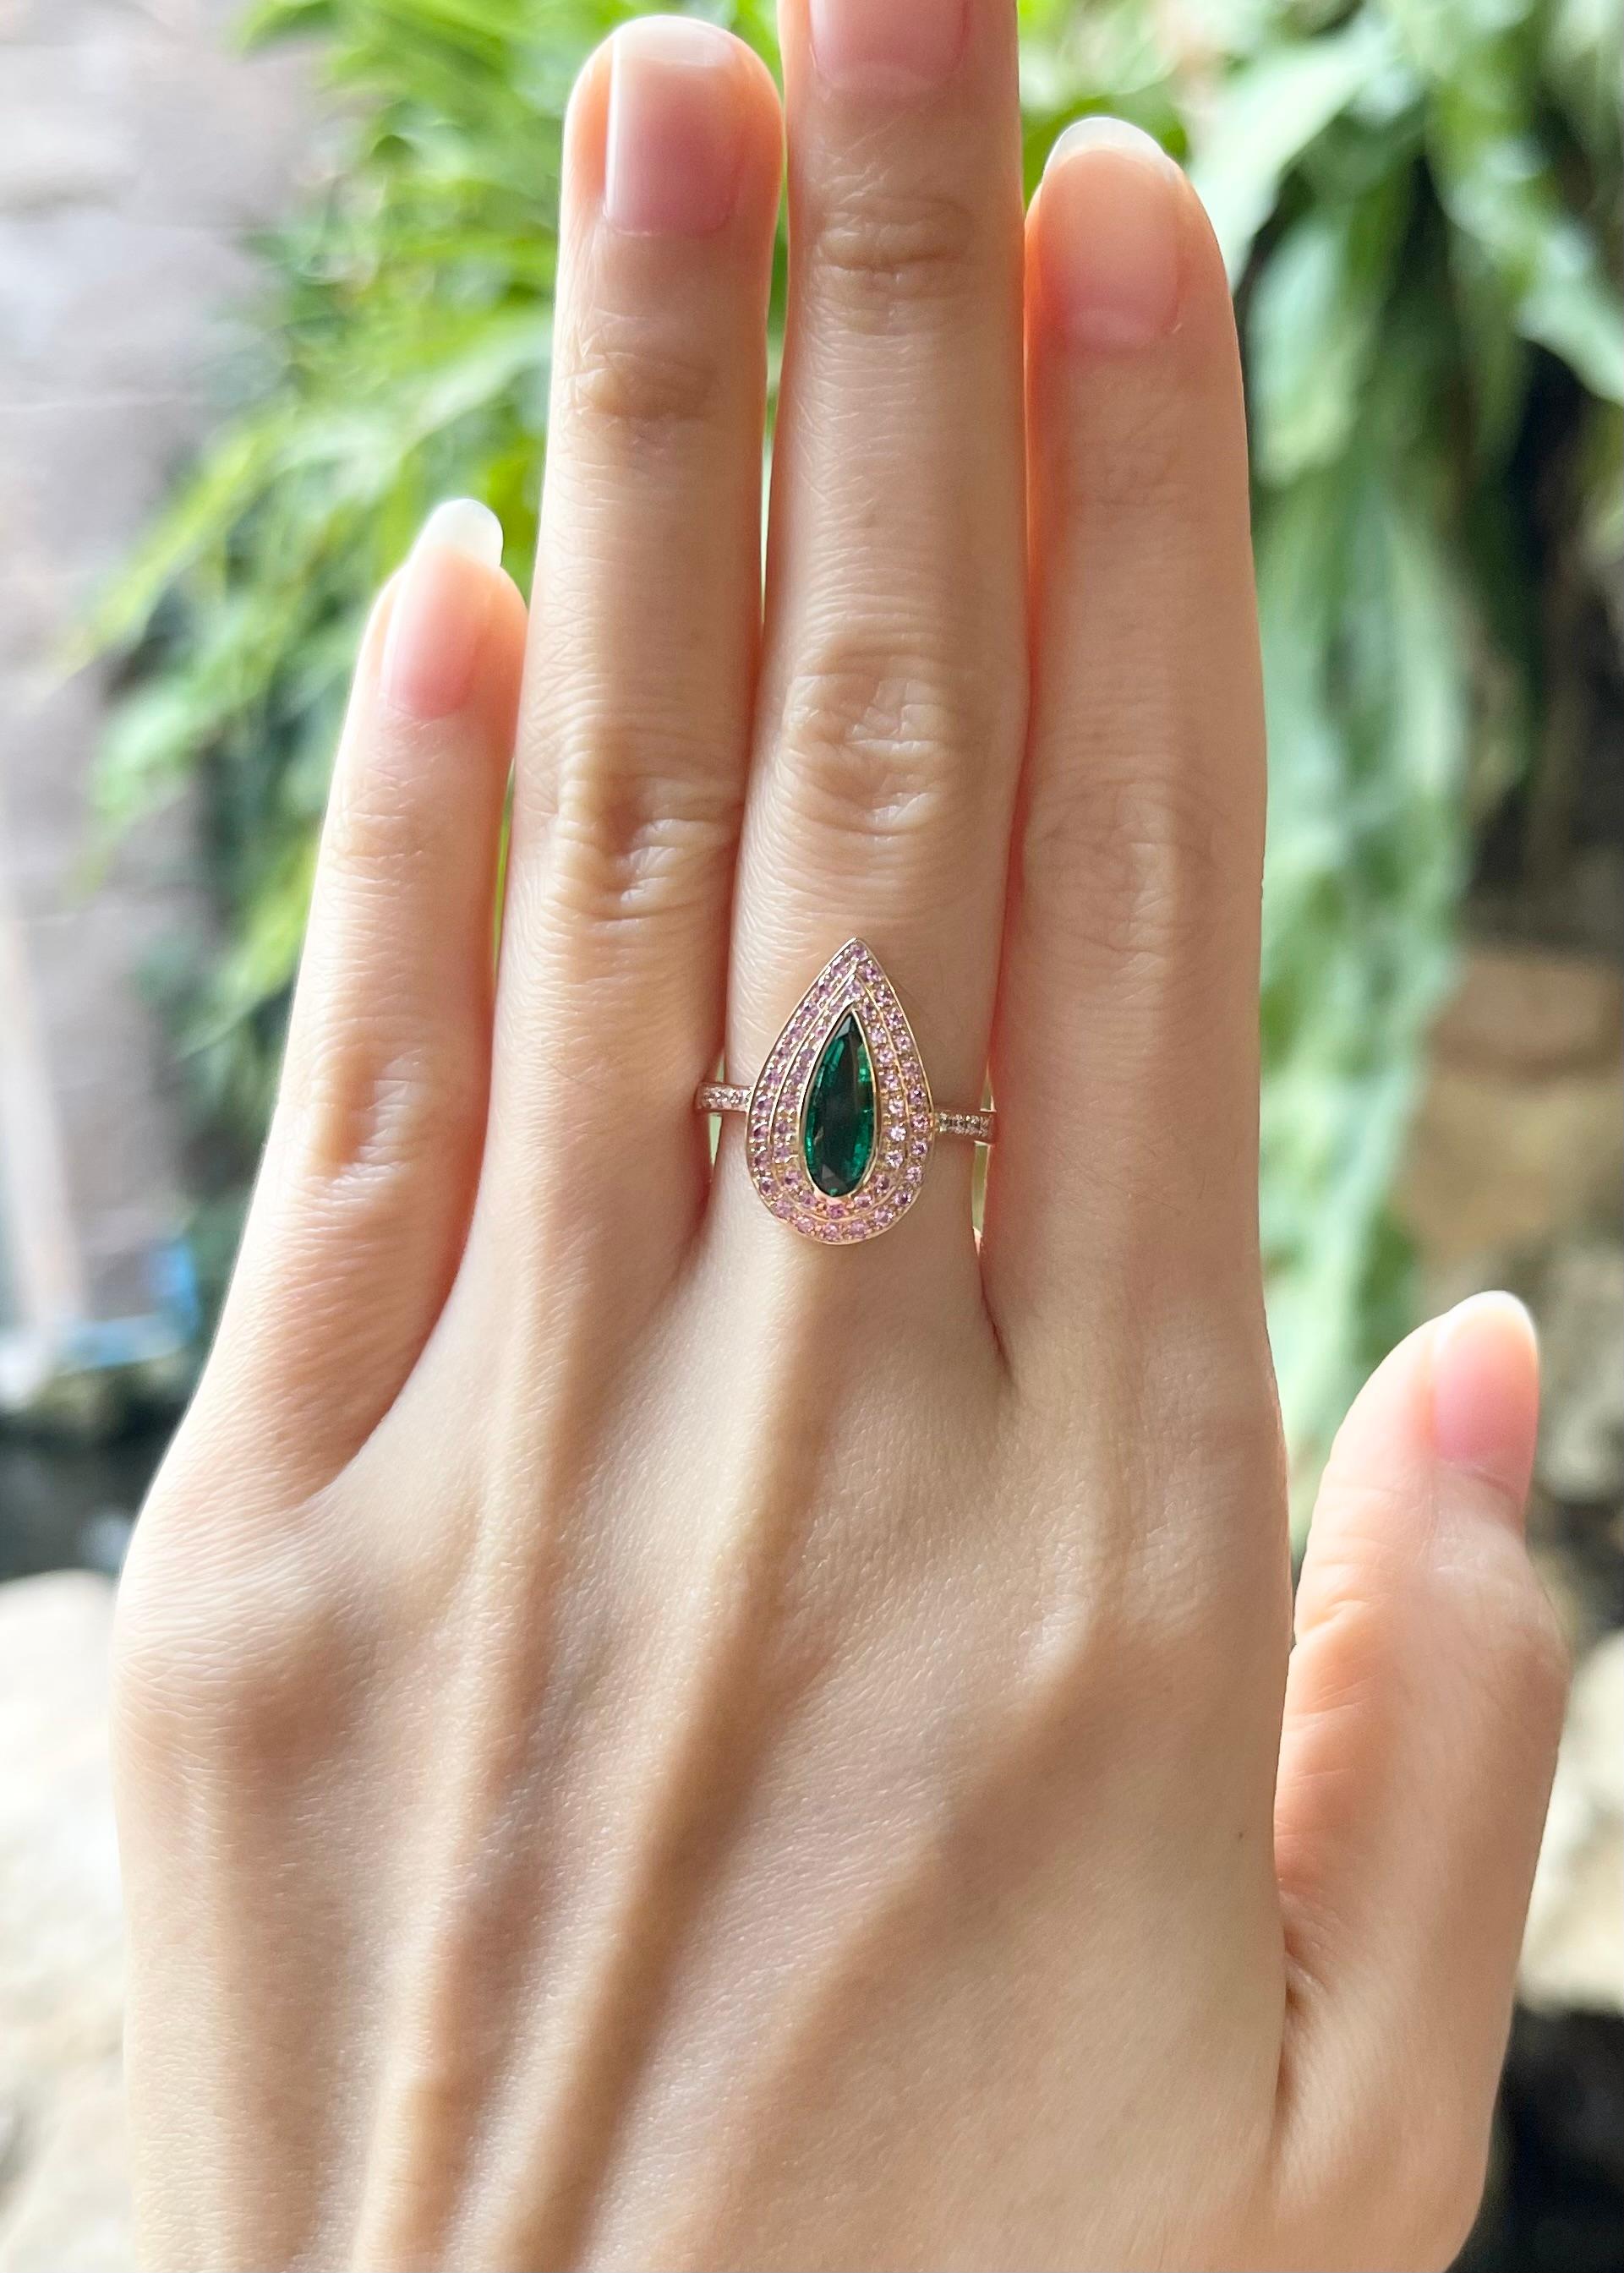 Emerald 0.62 carat, Pink Sapphire 0.35 carat and Diamond 0.06 carat Ring set in 18K Rose Gold Settings

Width:  1.1 cm 
Length: 1.8 cm
Ring Size: 53
Total Weight: 4.47 grams

